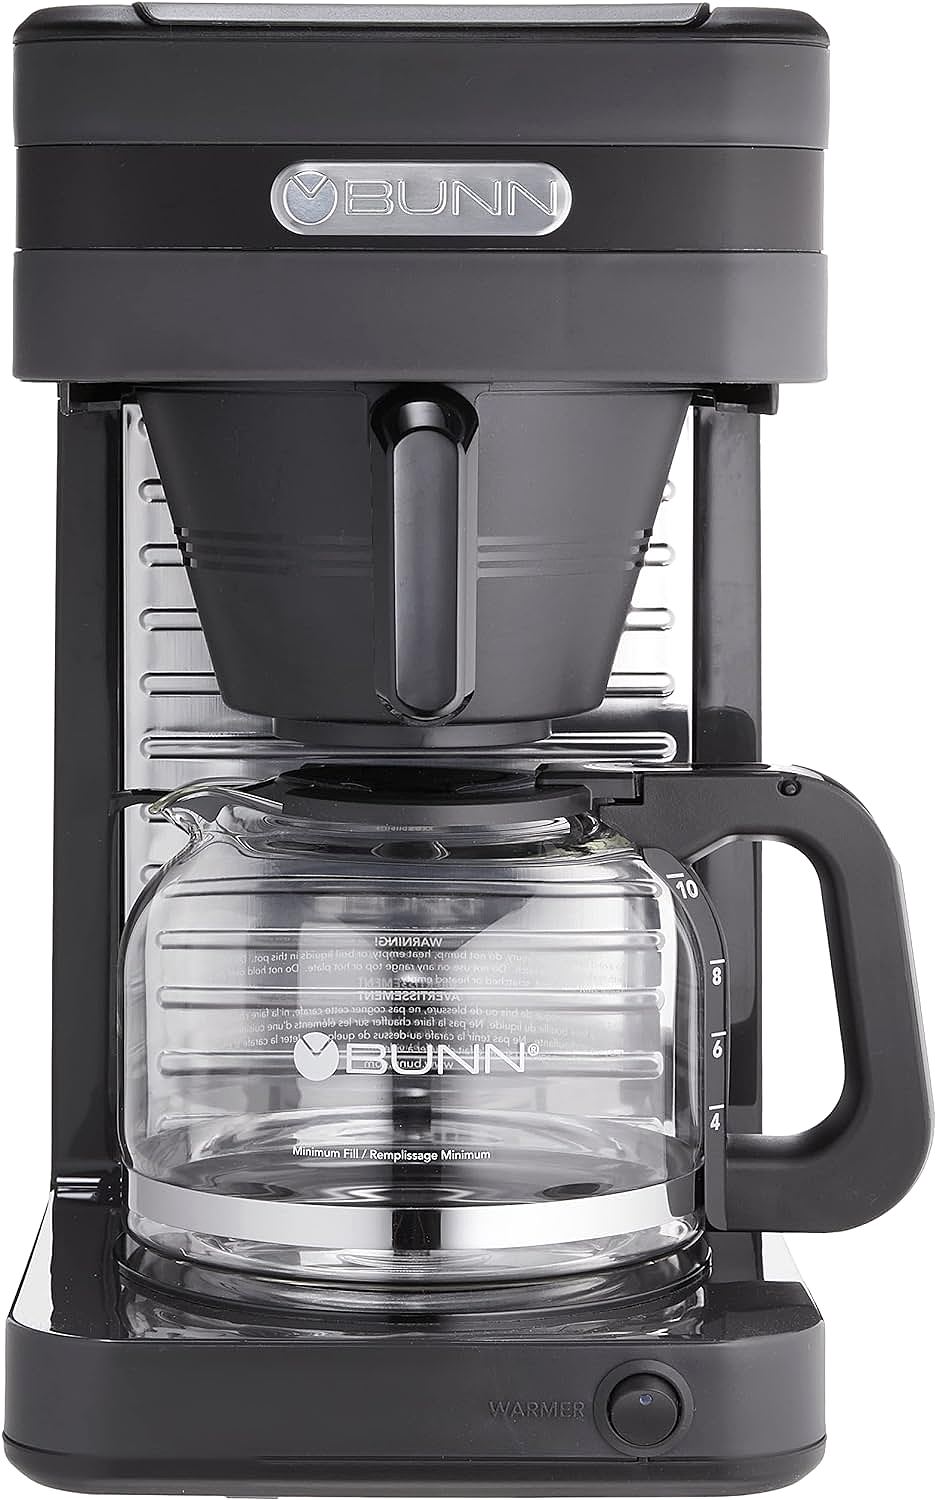 BUNN 52700 CSB2G Coffee Maker: The 4-Minute Barista for 10 Cups of Robust Coffee